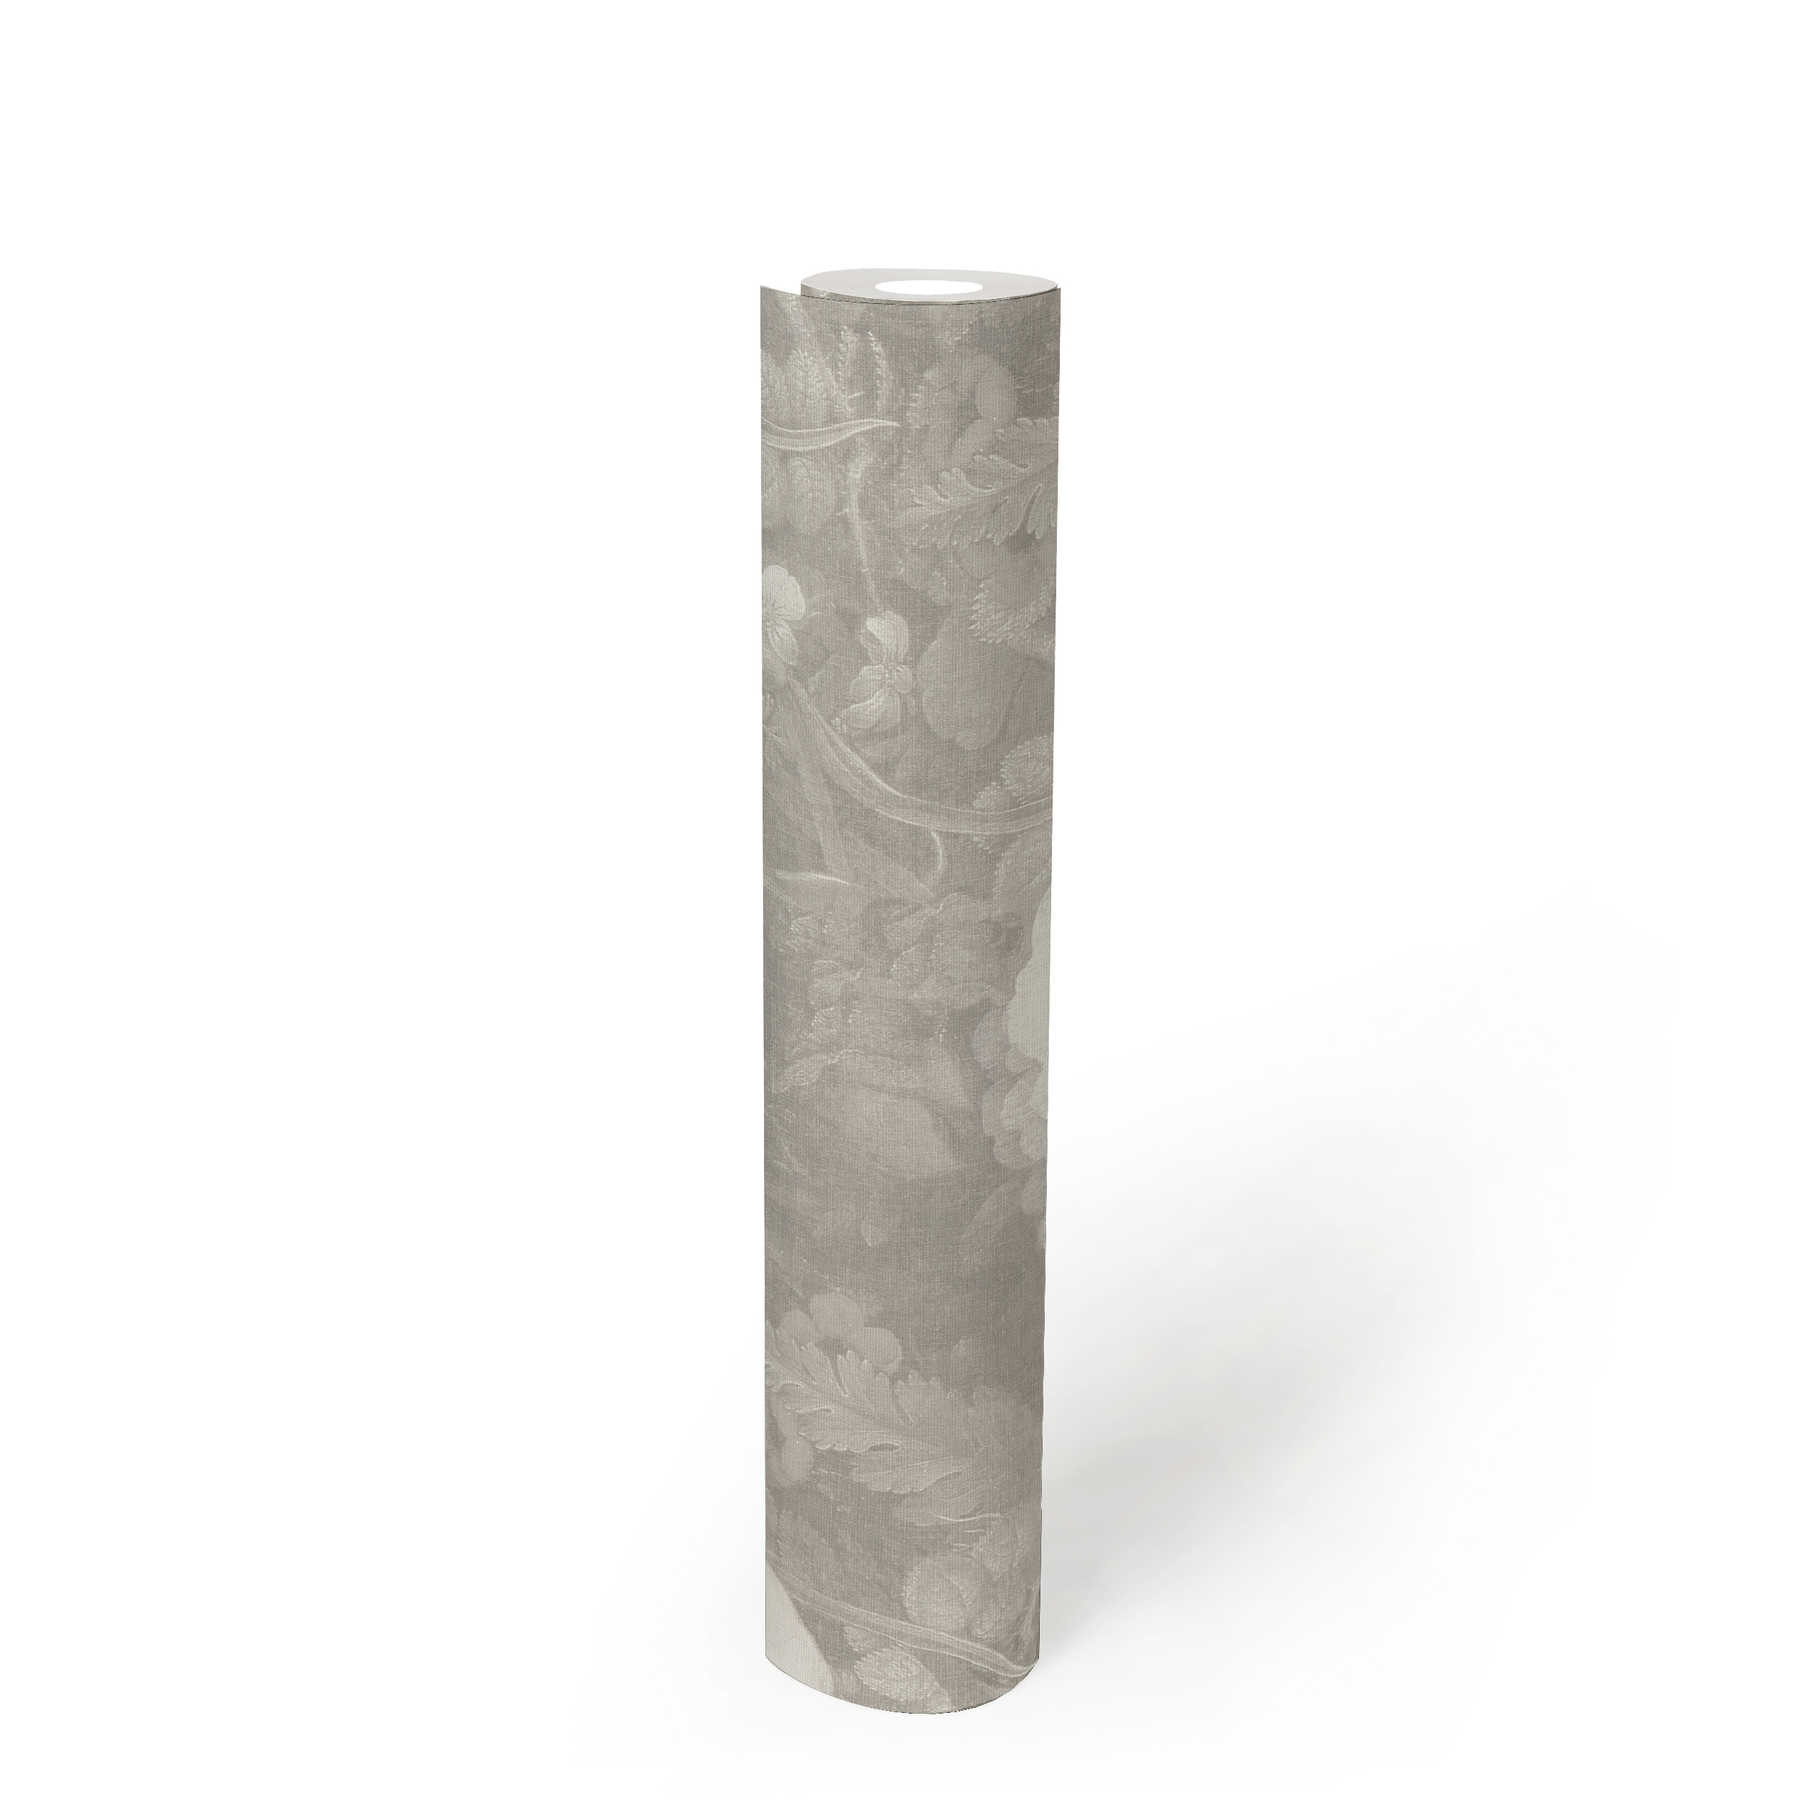             Painting style floral wallpaper, canvas look - grey, white
        